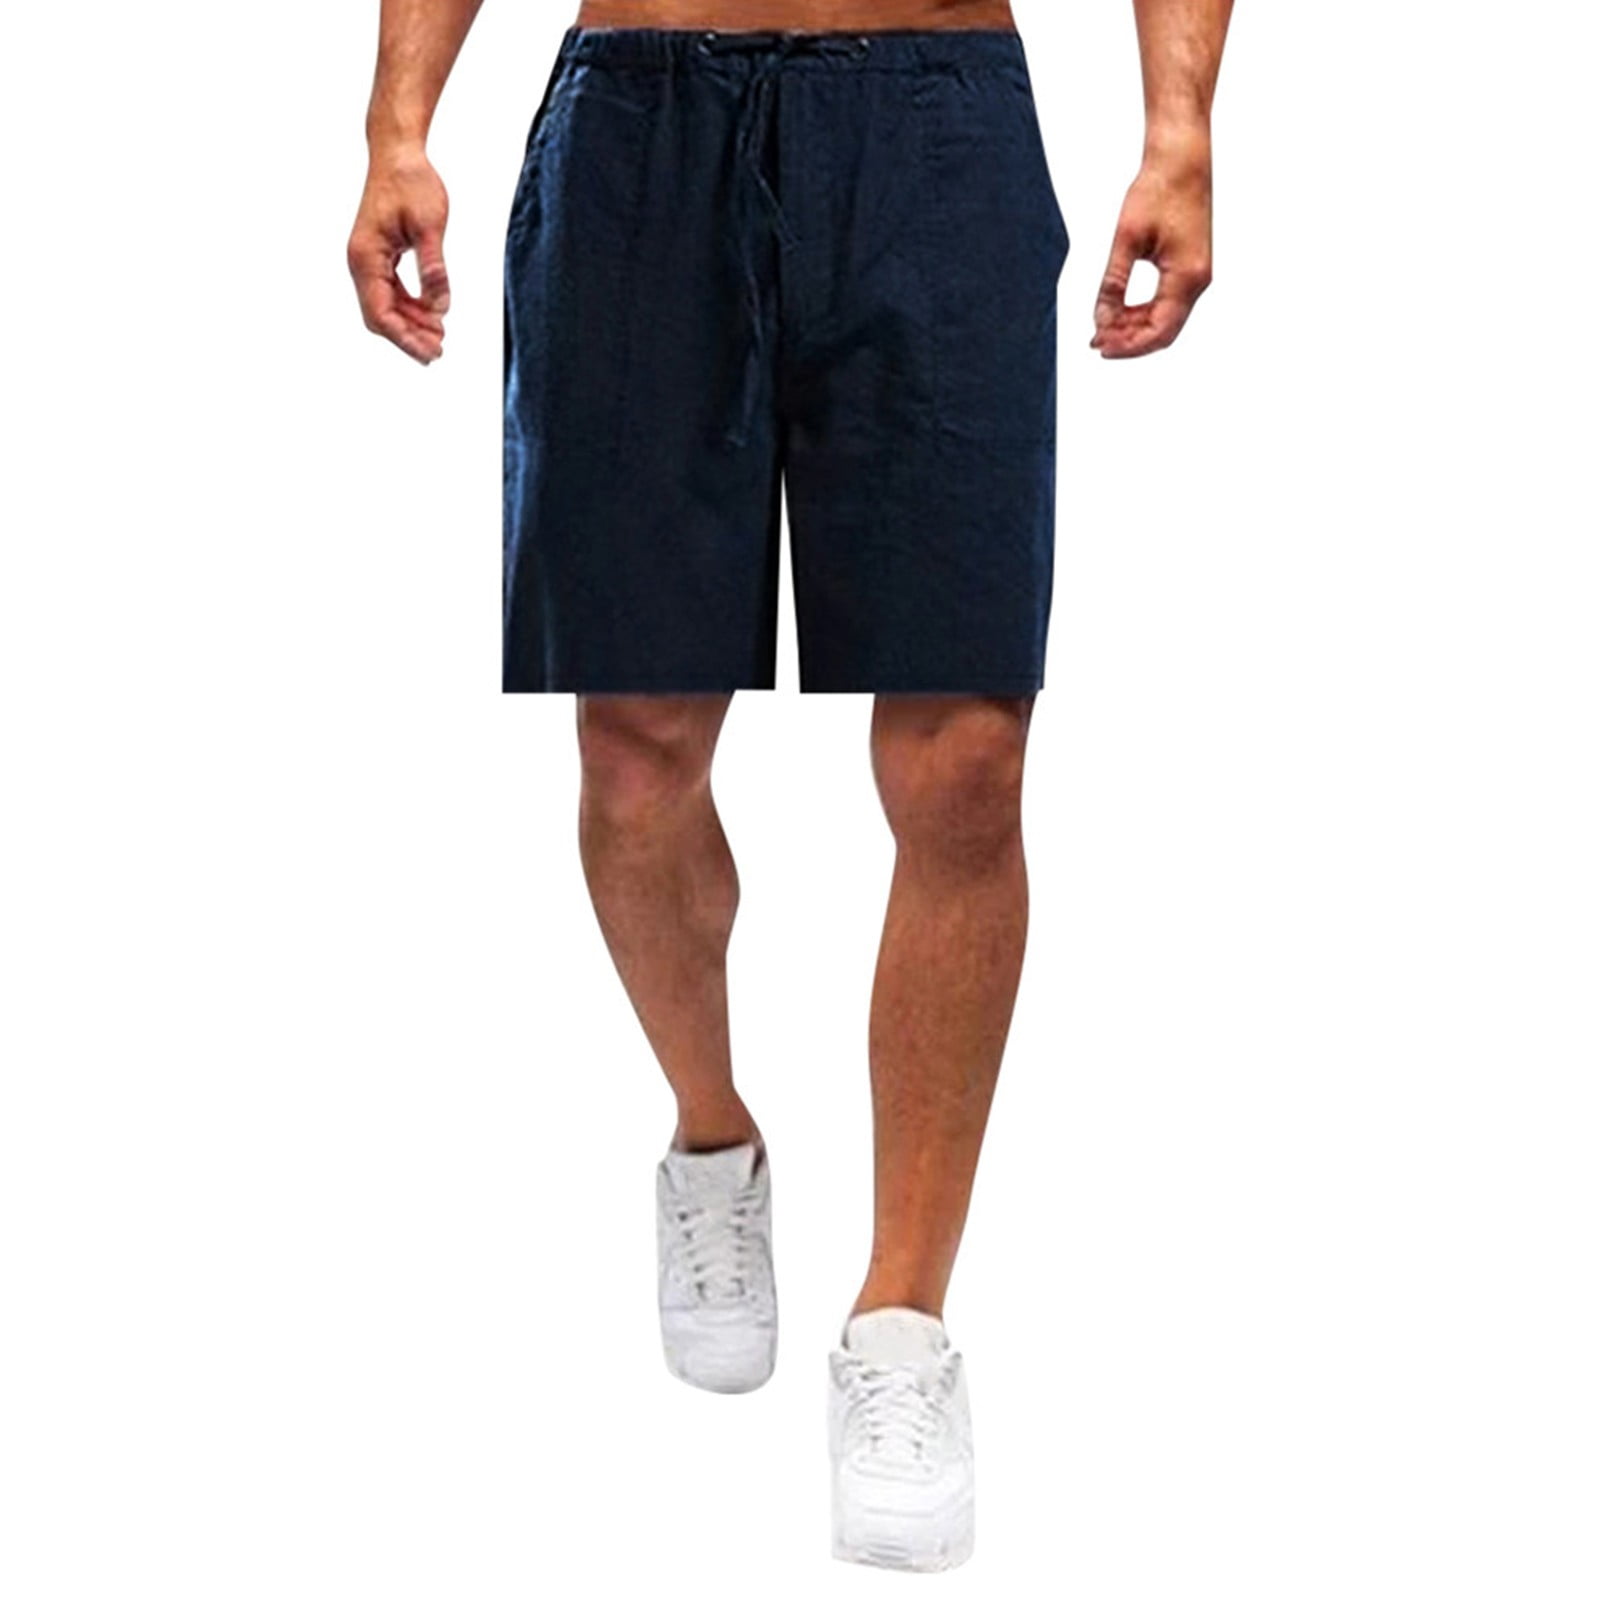 adviicd Mens 5 inch Shorts Men's Slim-Fit 5 Flat-Front Comfort Stretch  Chino Short Mens Work Shorts 